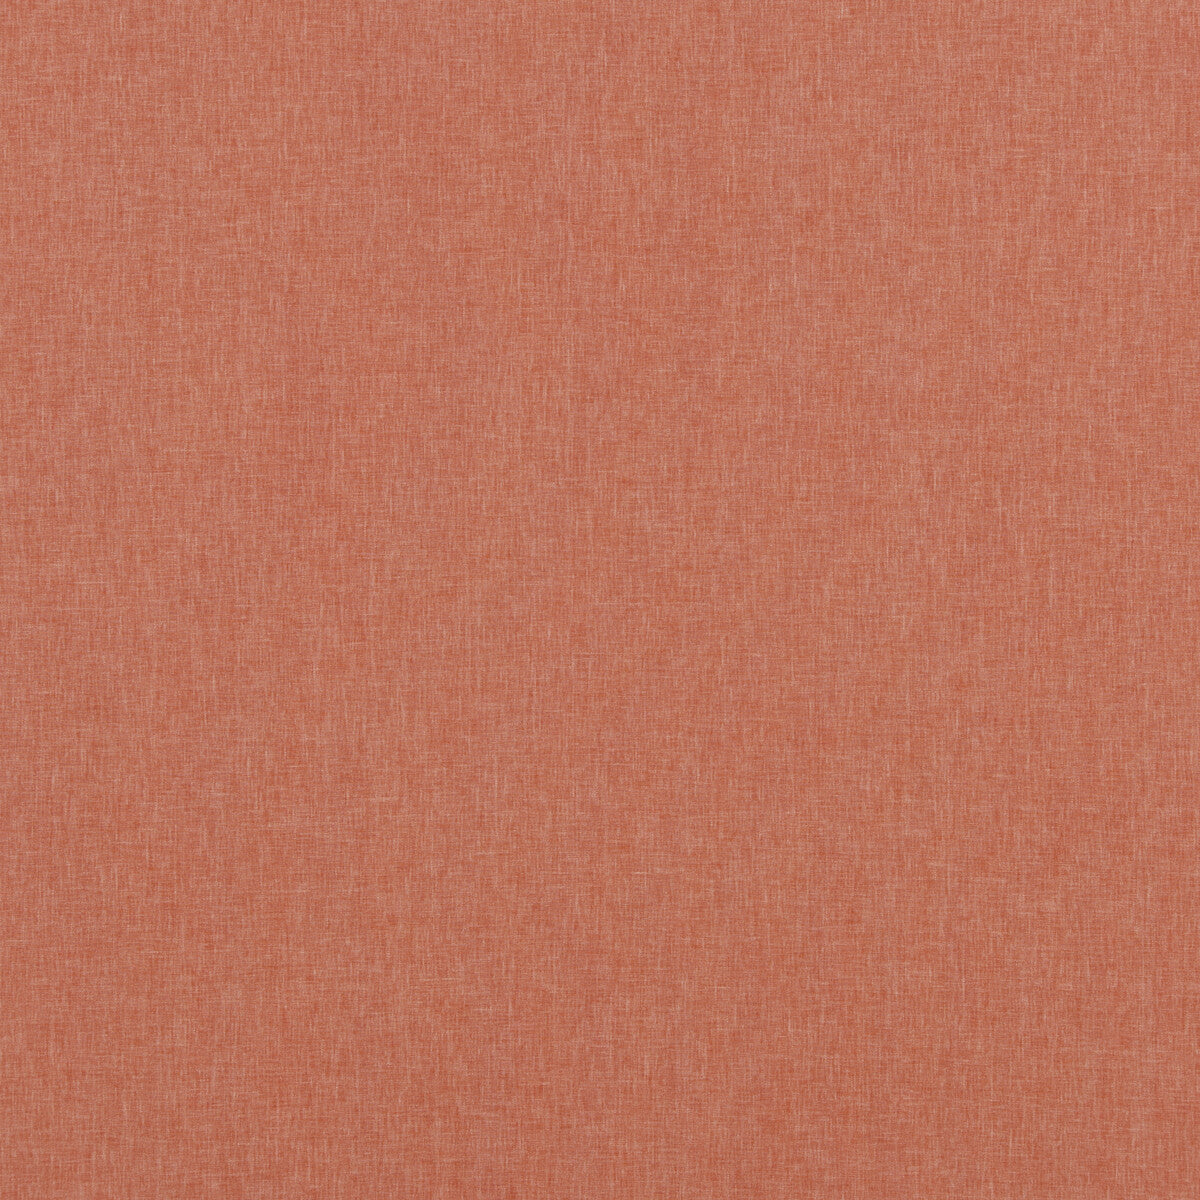 Carnival Plain fabric in spice color - pattern PF50420.330.0 - by Baker Lifestyle in the Carnival collection